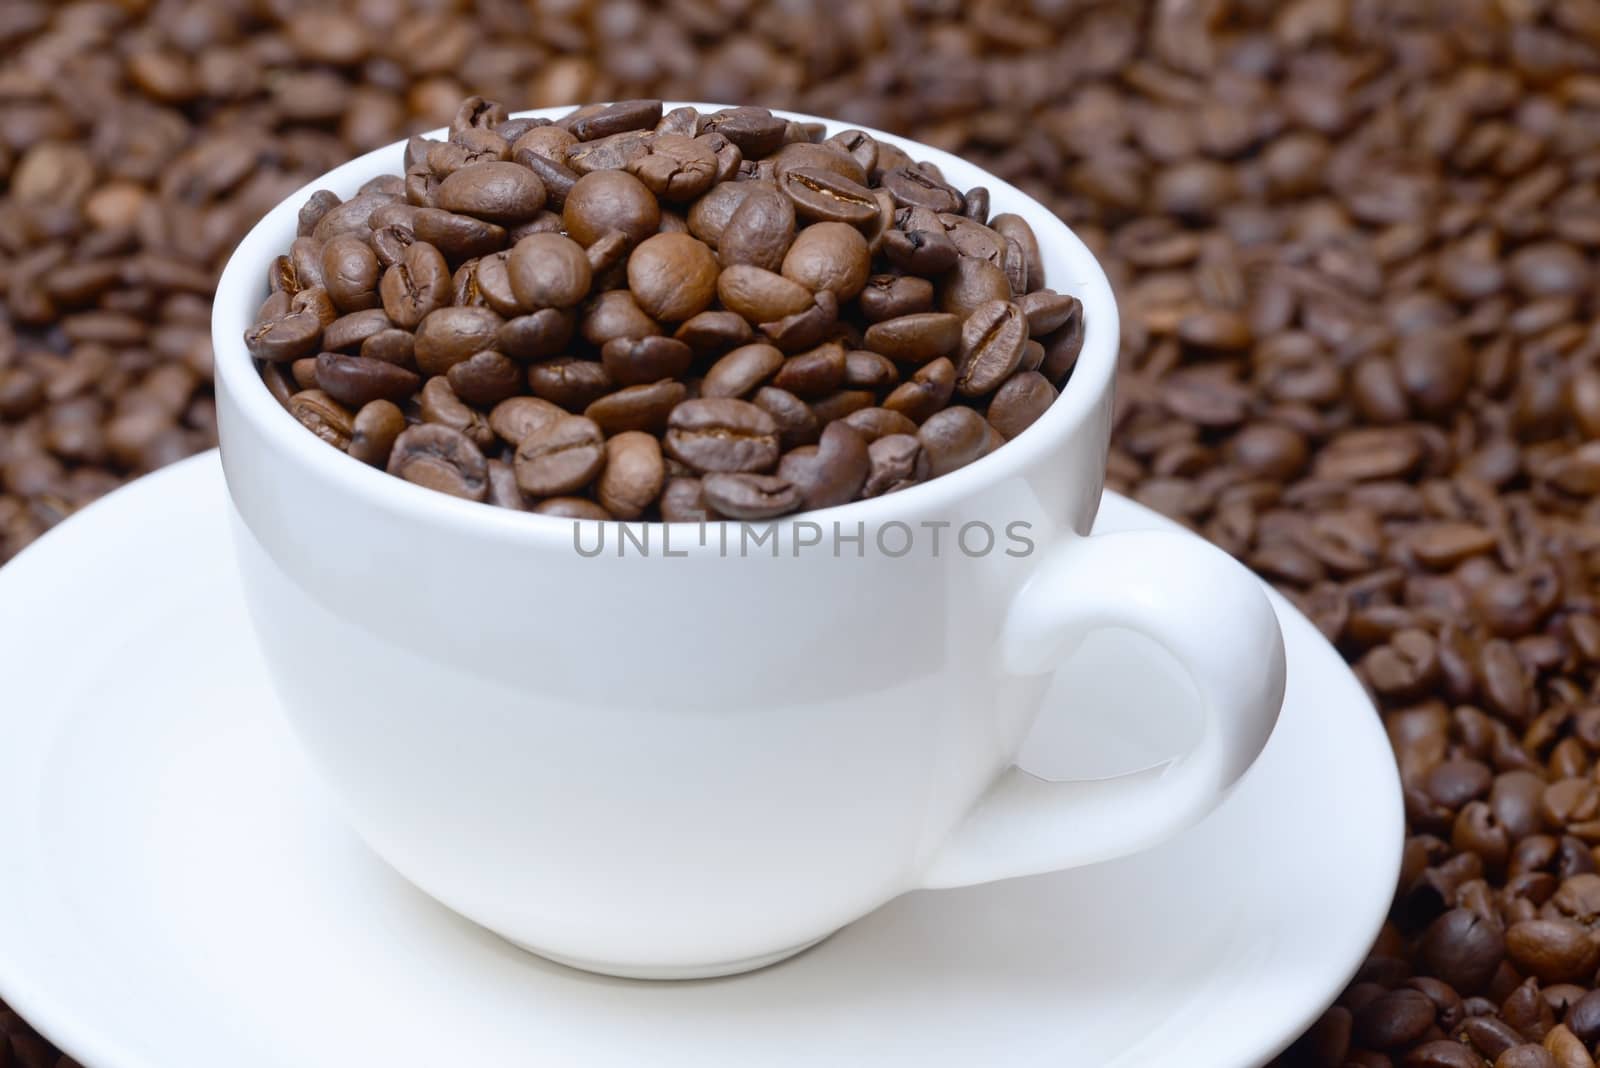 Photo of a cup of coffee with coffee grains on a saucer. White color cup on a brown coffee beans background. Food photography.